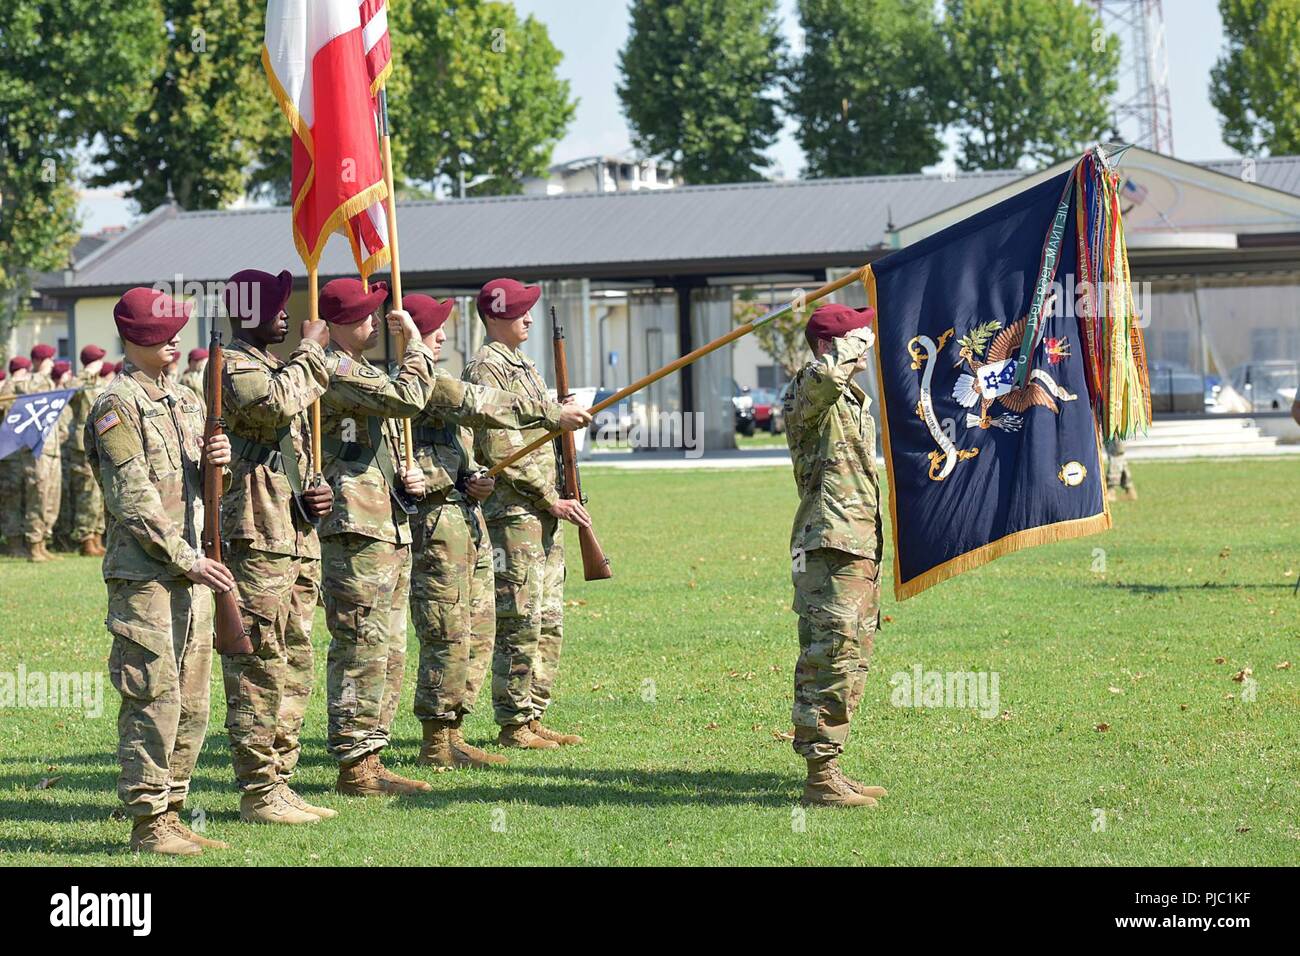 U.S. Army Sgt. Maj. Kevin A. Mclellan, Paratrooper assigned to the 1st Battalion, 503rd Infantry Regiment, 173rd Airborne Brigade, salutes and present colors during the change of responsibility ceremony at Caserma Ederle in Vicenza, Italy, July 19, 2018. The 173rd Airborne Brigade is the U.S. Army Contingency Response Force in Europe, capable of projecting ready forces anywhere in the U.S. European, Africa or Central Commands' areas of responsibility. Stock Photo